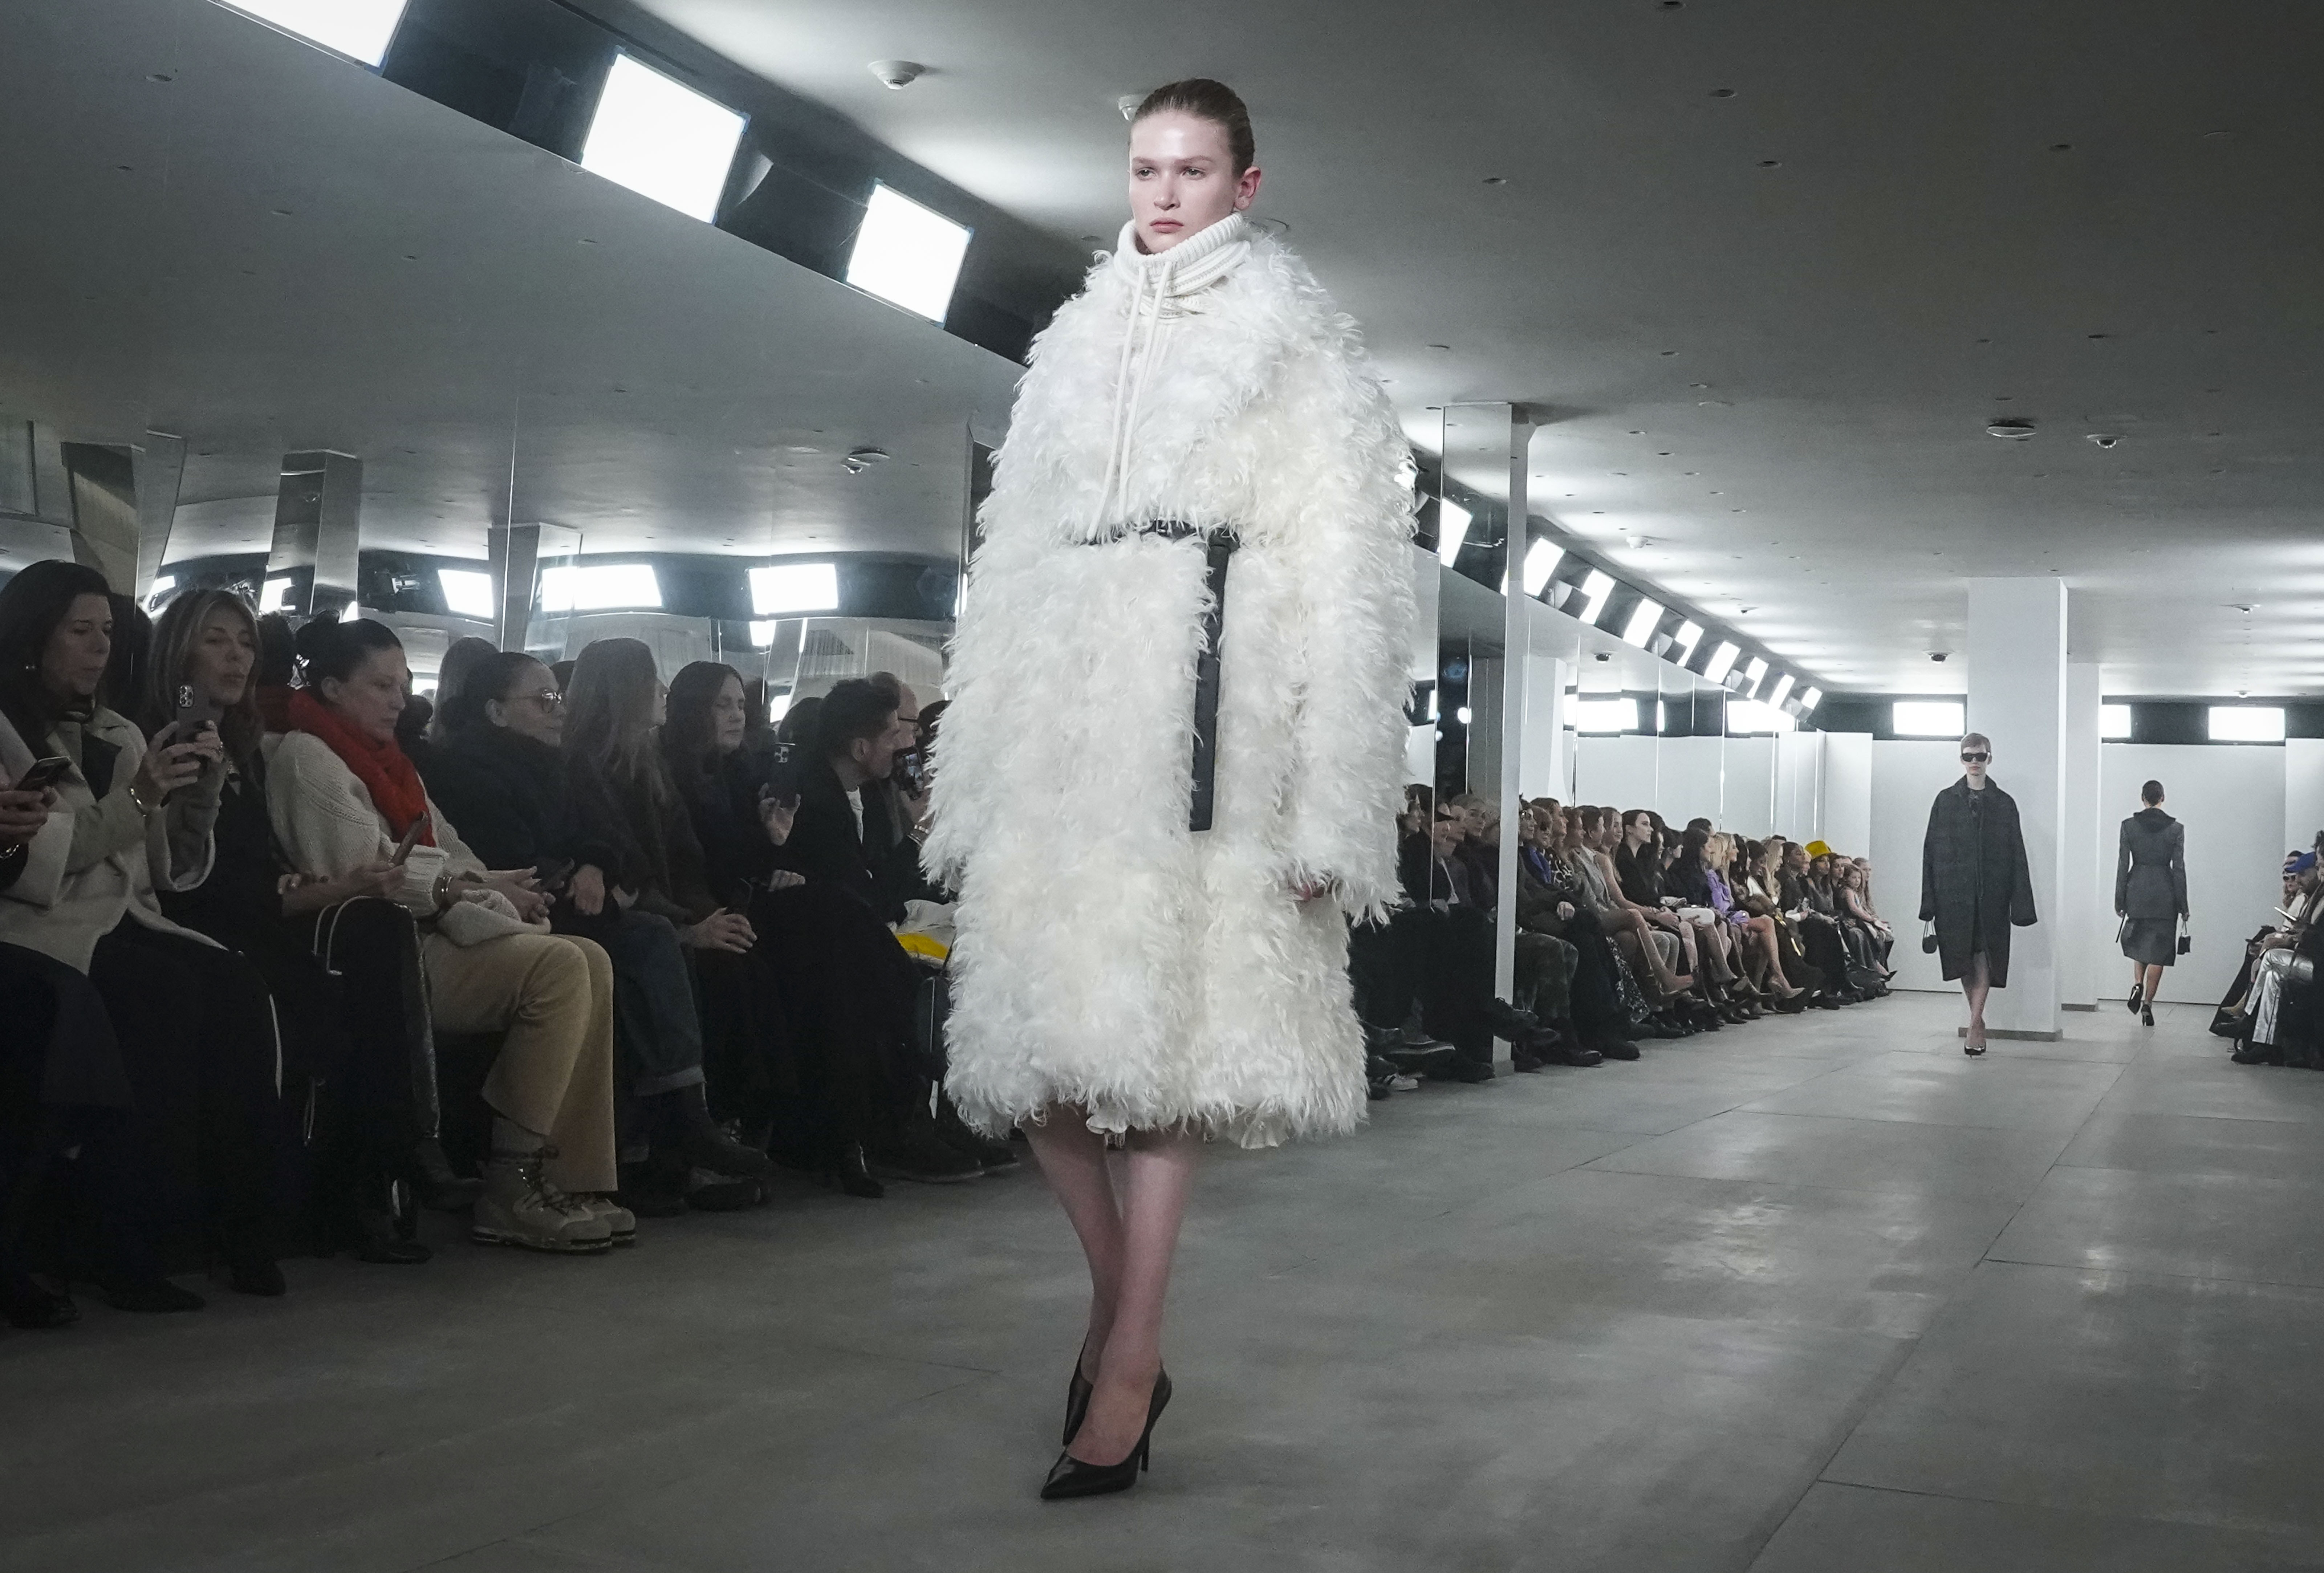 Michael Kors launches Fall-Winter collection at NY Fashion Week